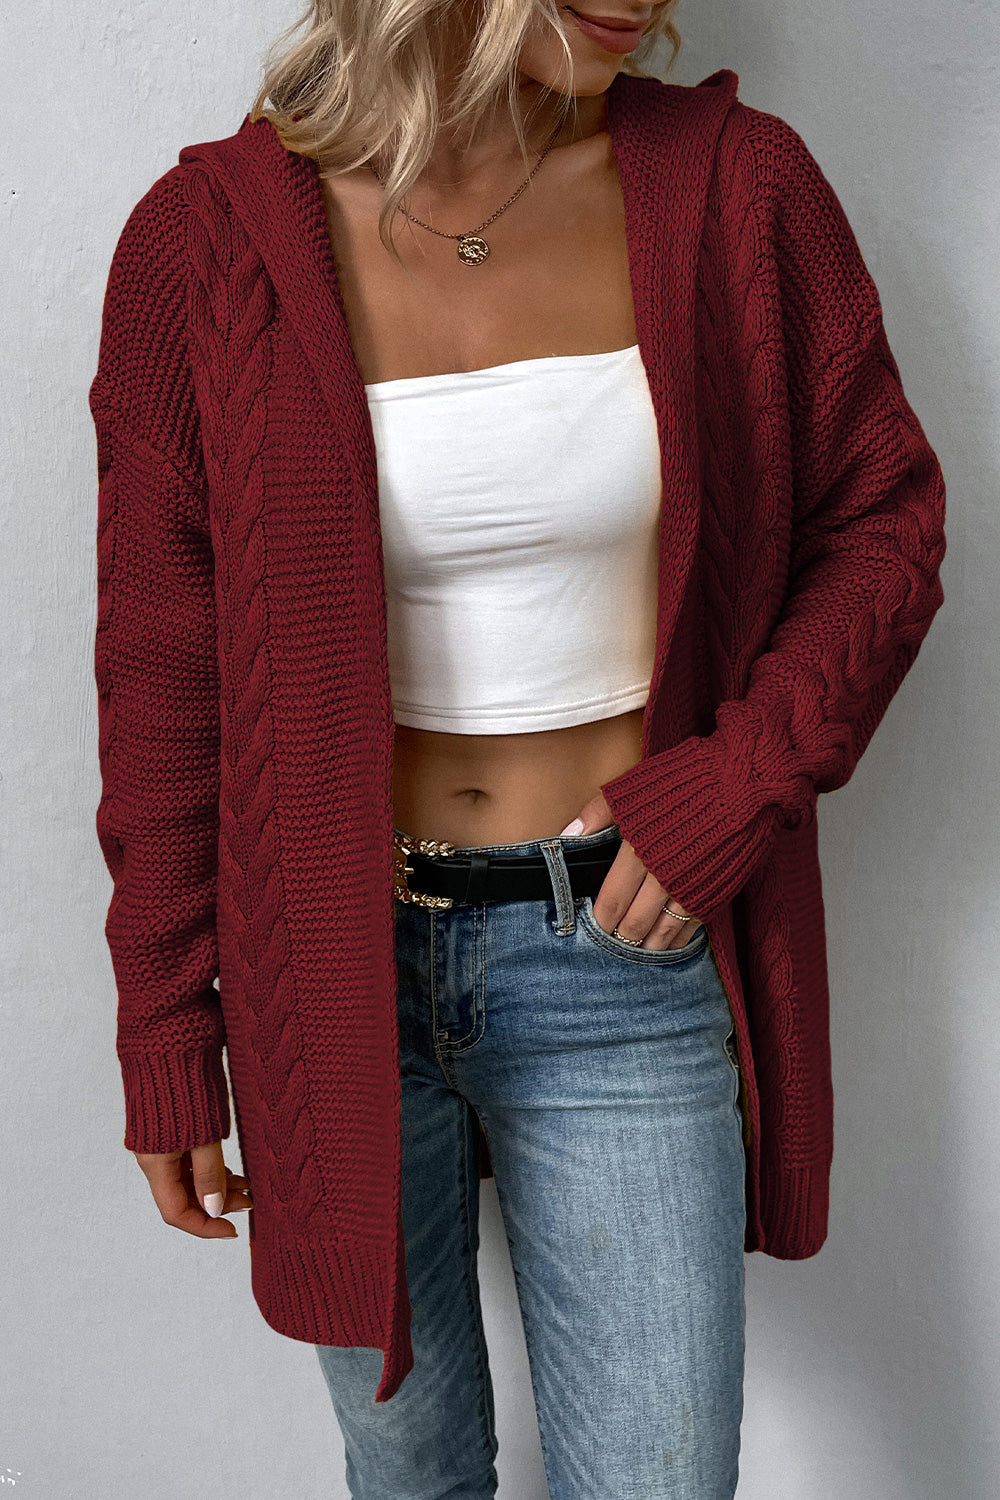 Trendsi Cupid Beauty Supplies Woman Cardigan Cable-Knit Dropped Shoulder Hooded Cardigan